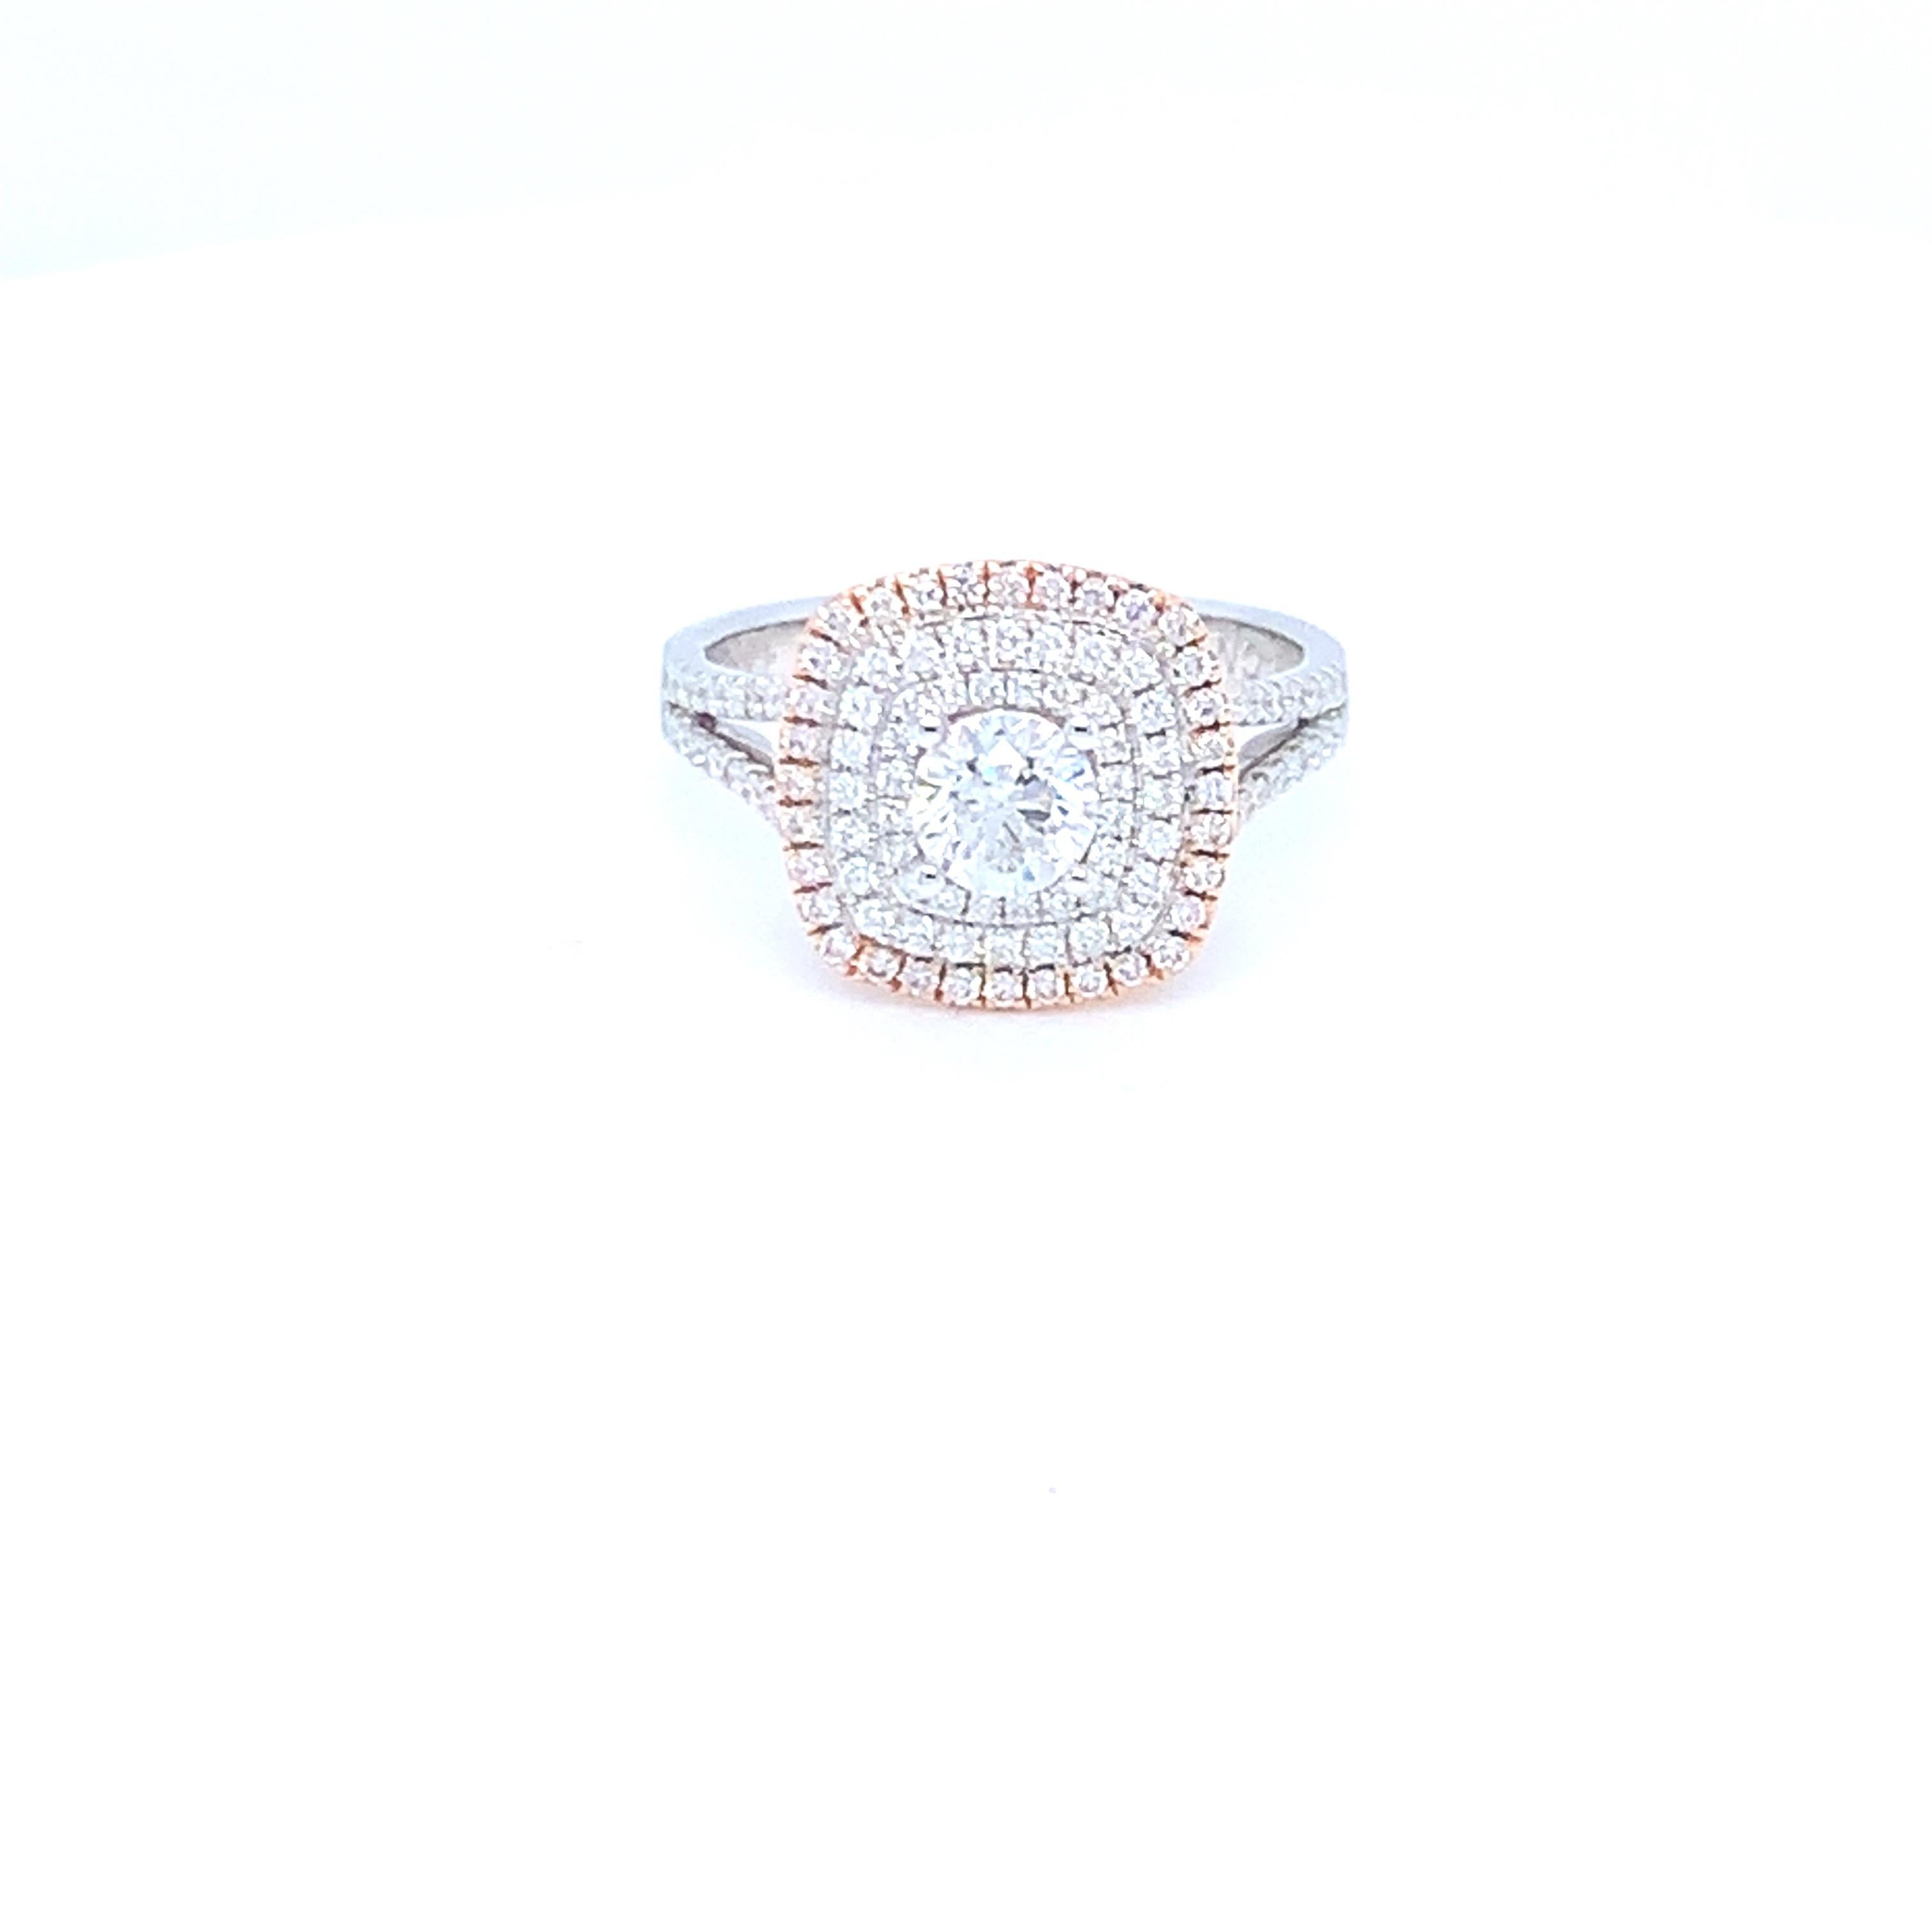 This lovely ring features a halo design in white and pink diamonds. Set in two tone gold to match the two tone diamond settings. This piece has been crafted by hand to achieve the finest quality. 
Center diamond: 0.58ct
Pink diamond: 0.14ct
White